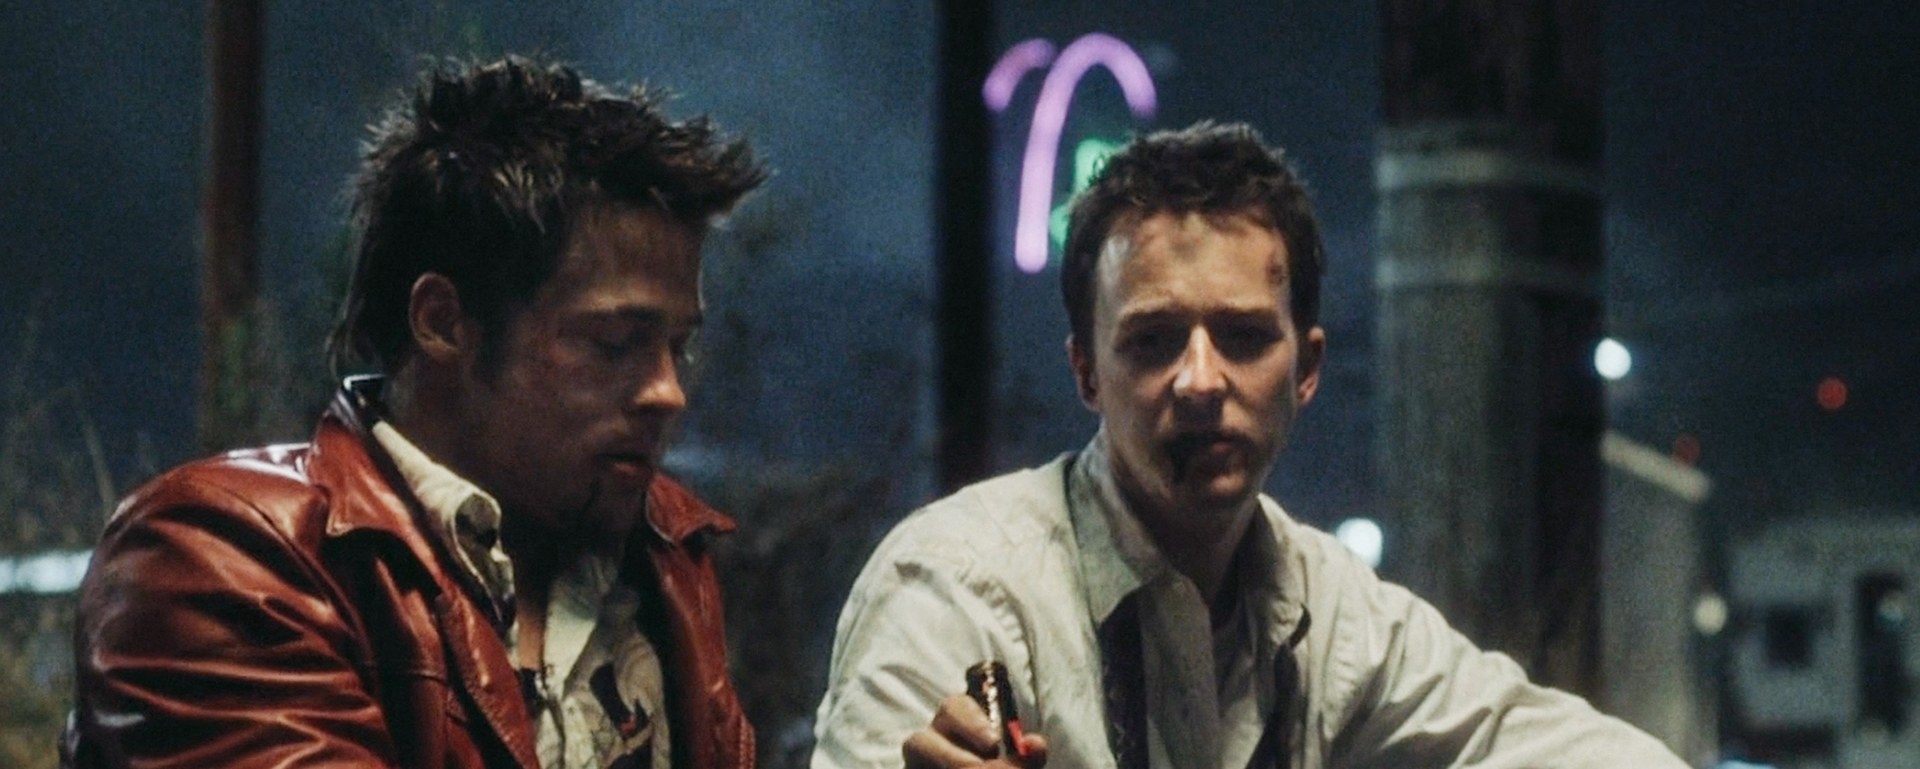 tyler durden and the narrator are sharing a beer